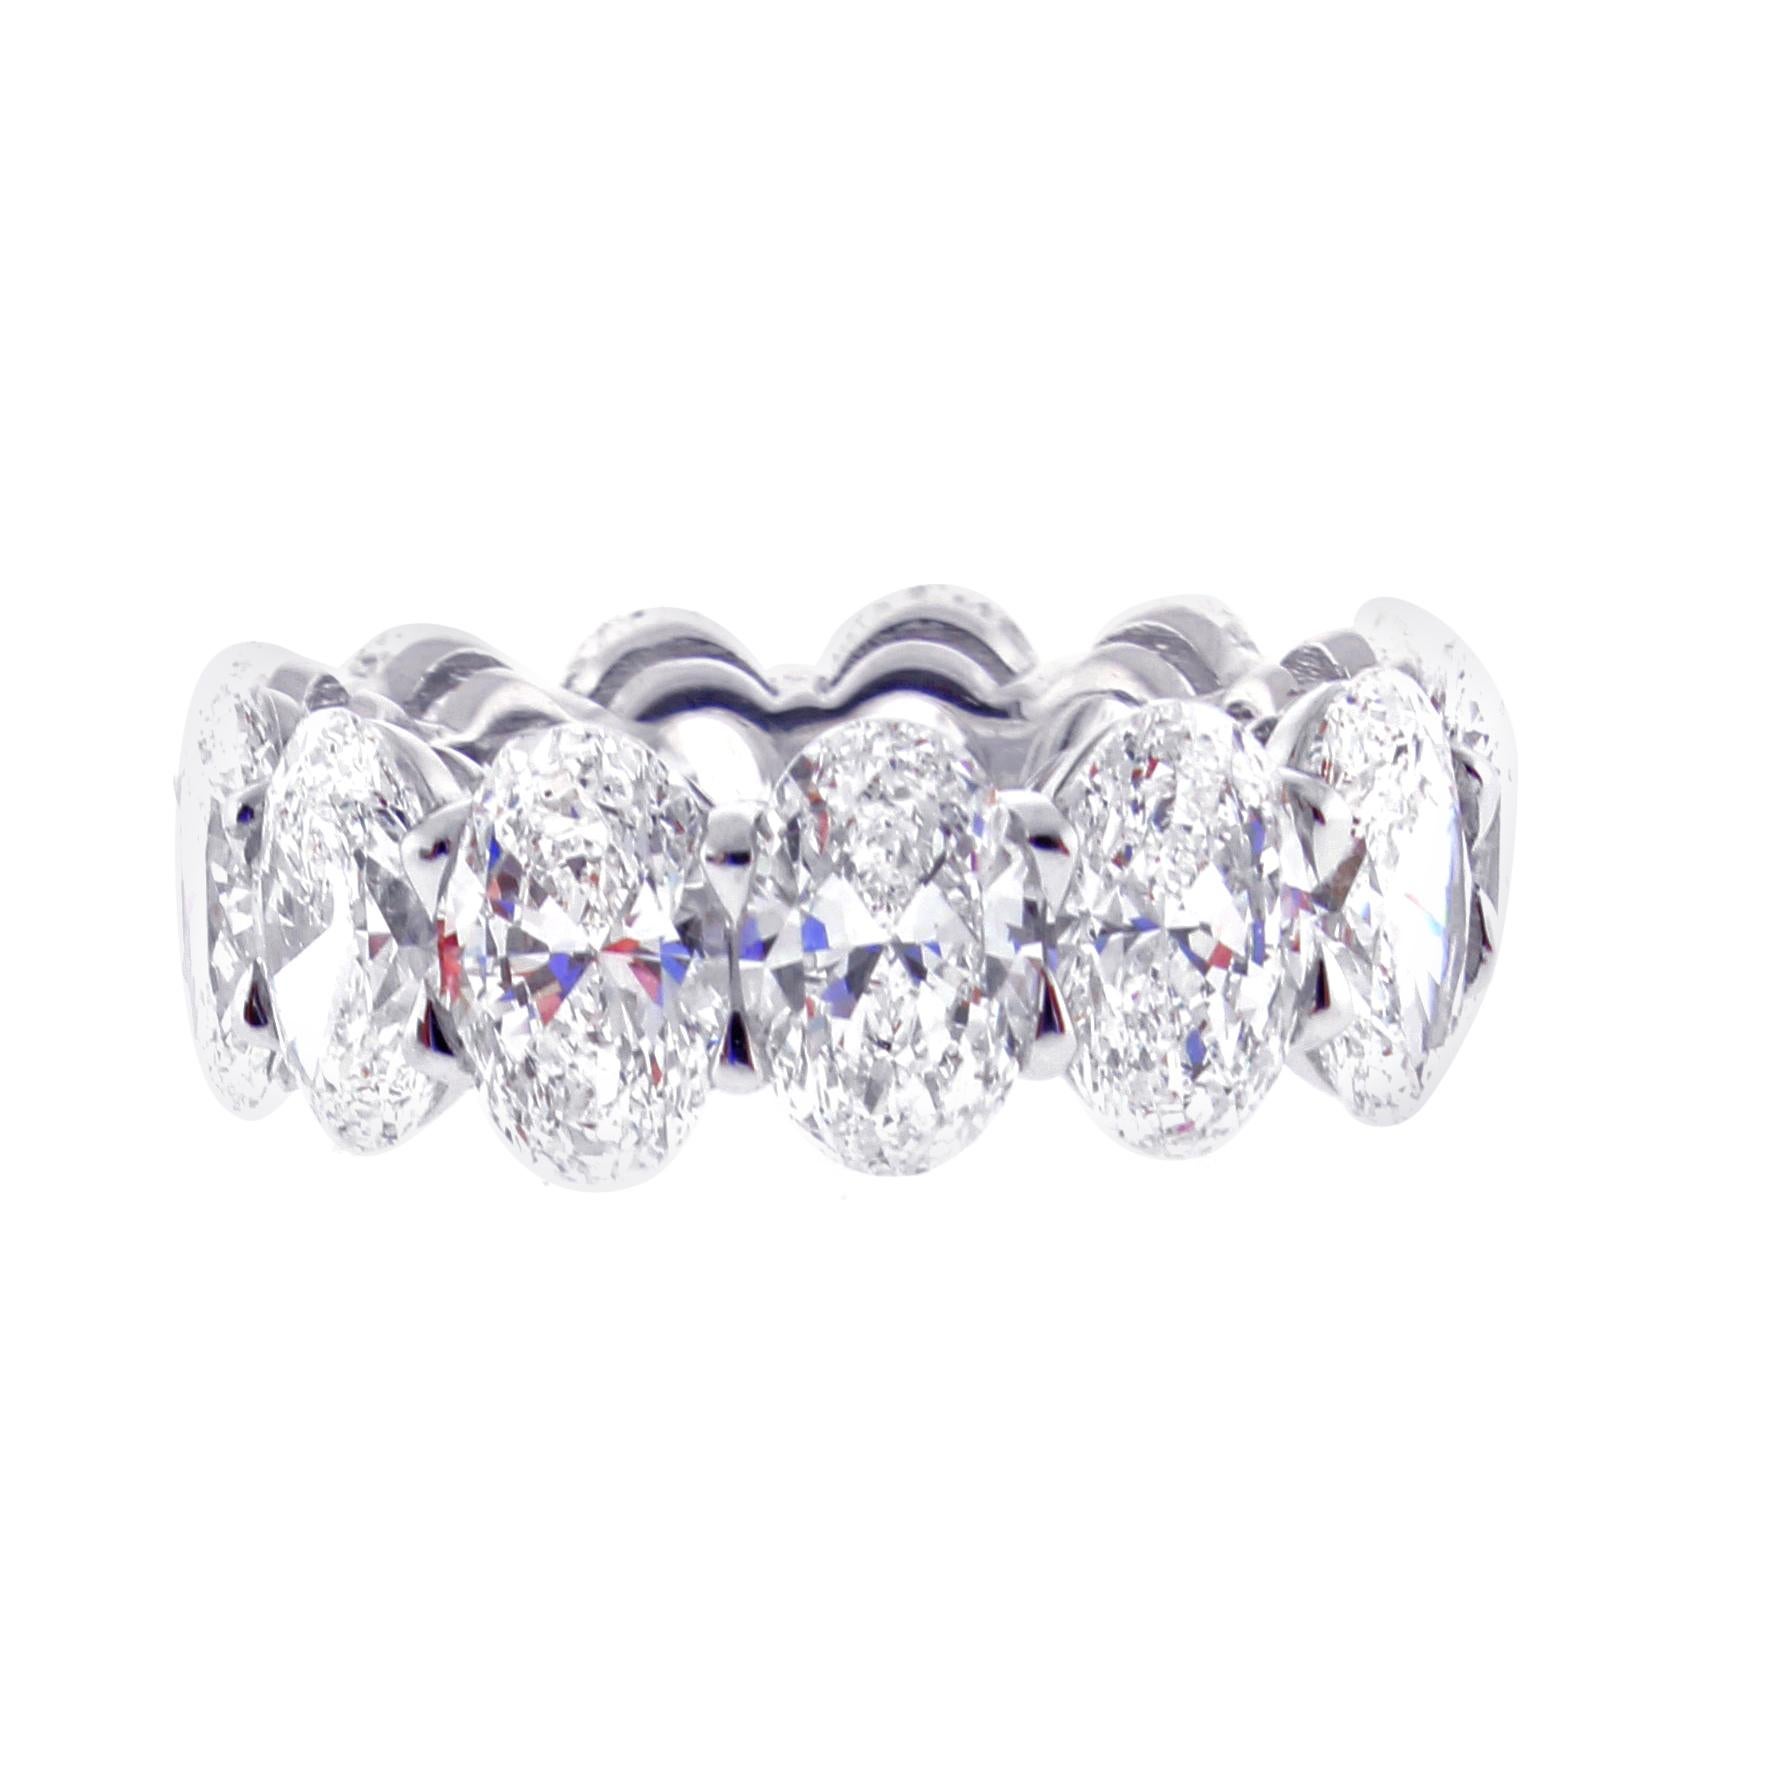 One Carat Each G.I.A. Diamond Oval Band Ring, by Pampillonia